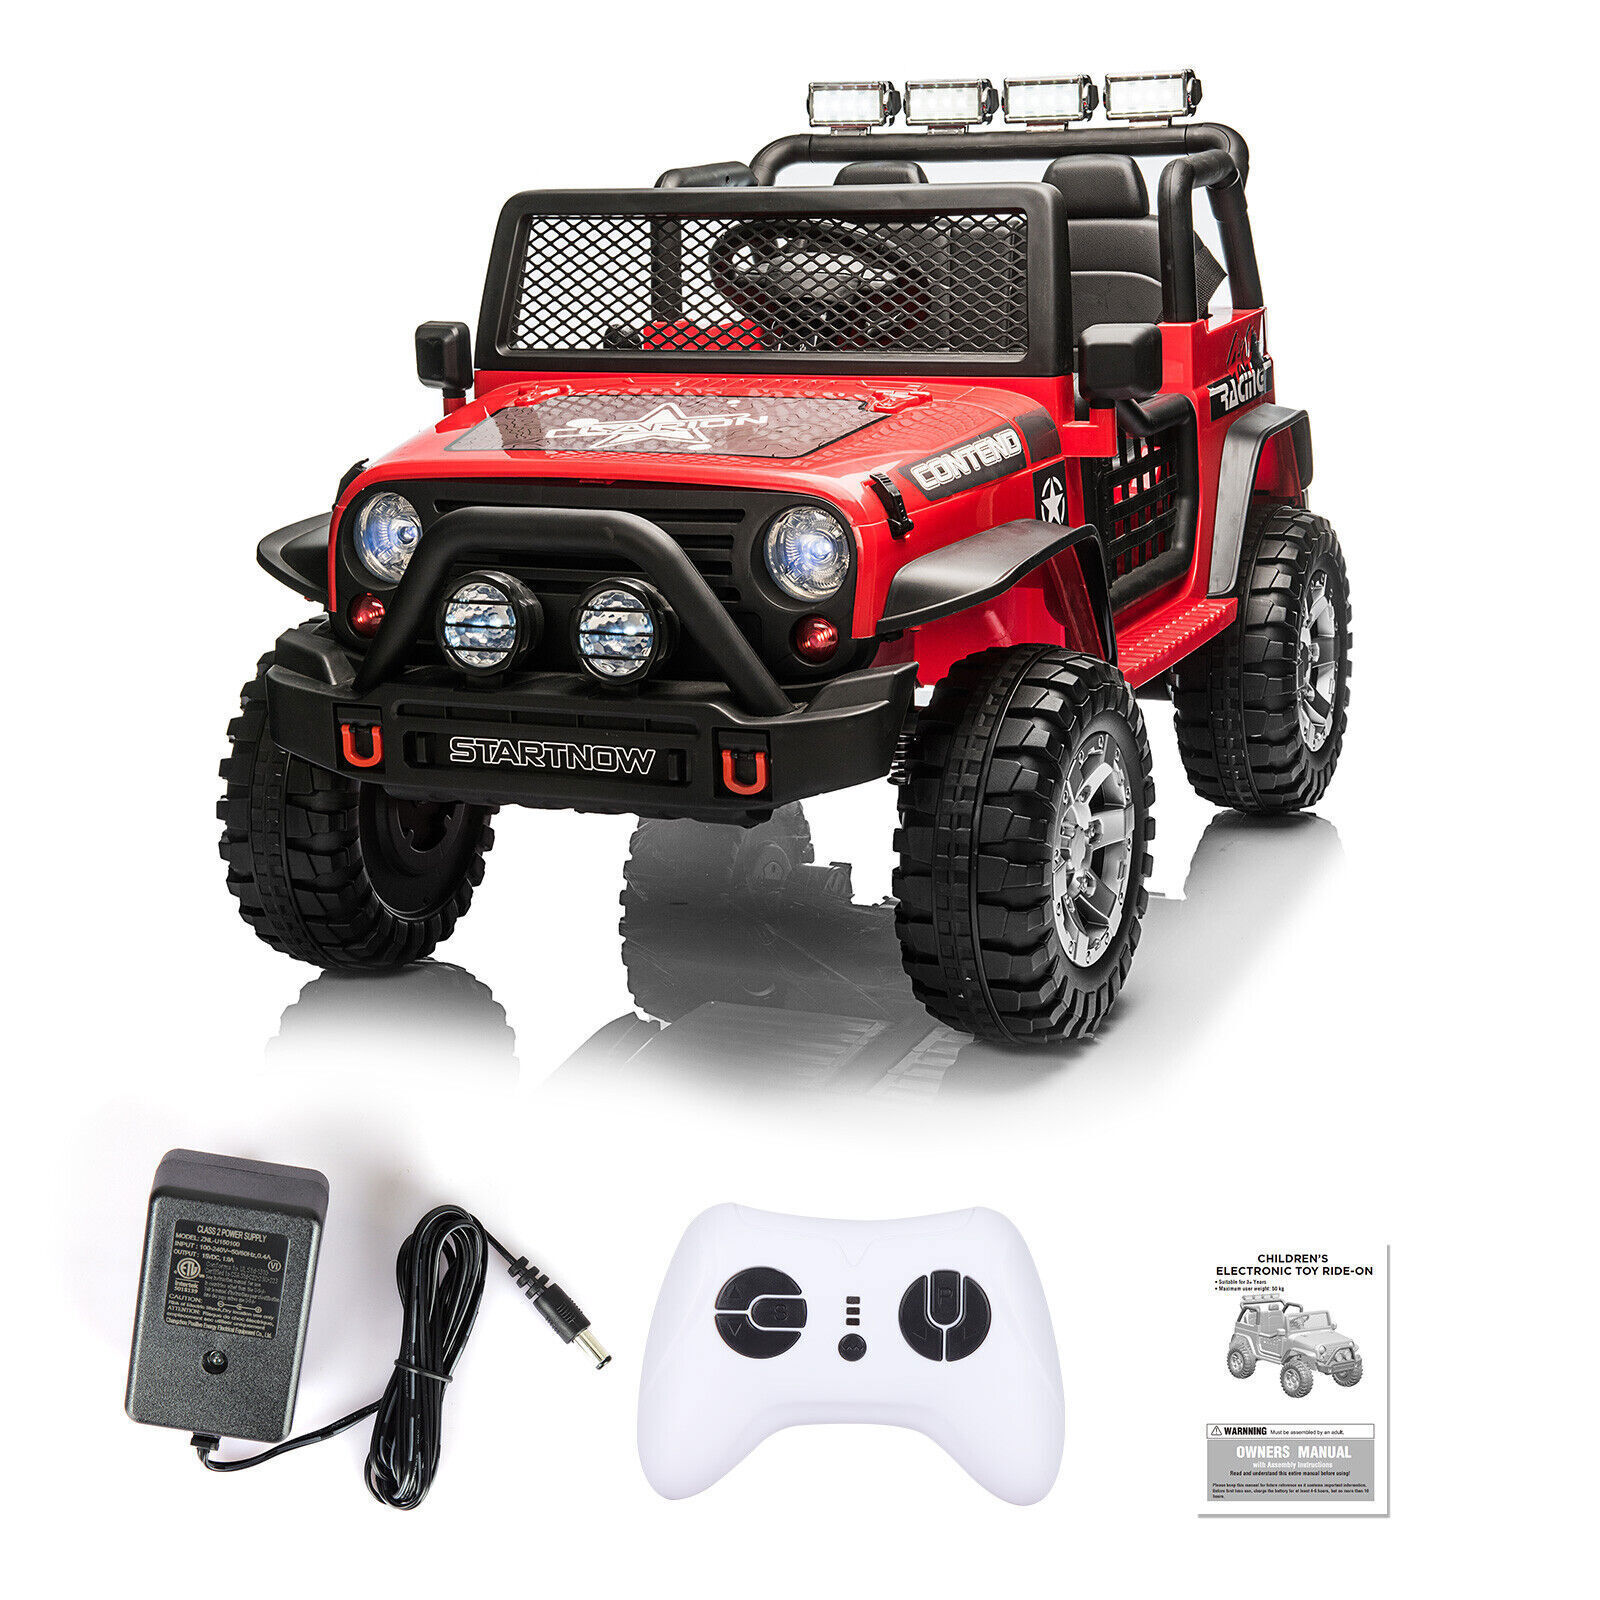 Dazone 12V Kids Ride on Jeep Car, Electric 2 Seats Off-road Jeep Ride on Truck Vehicle with Remote Control, LED Lights, MP3 Music, Red - image 4 of 7